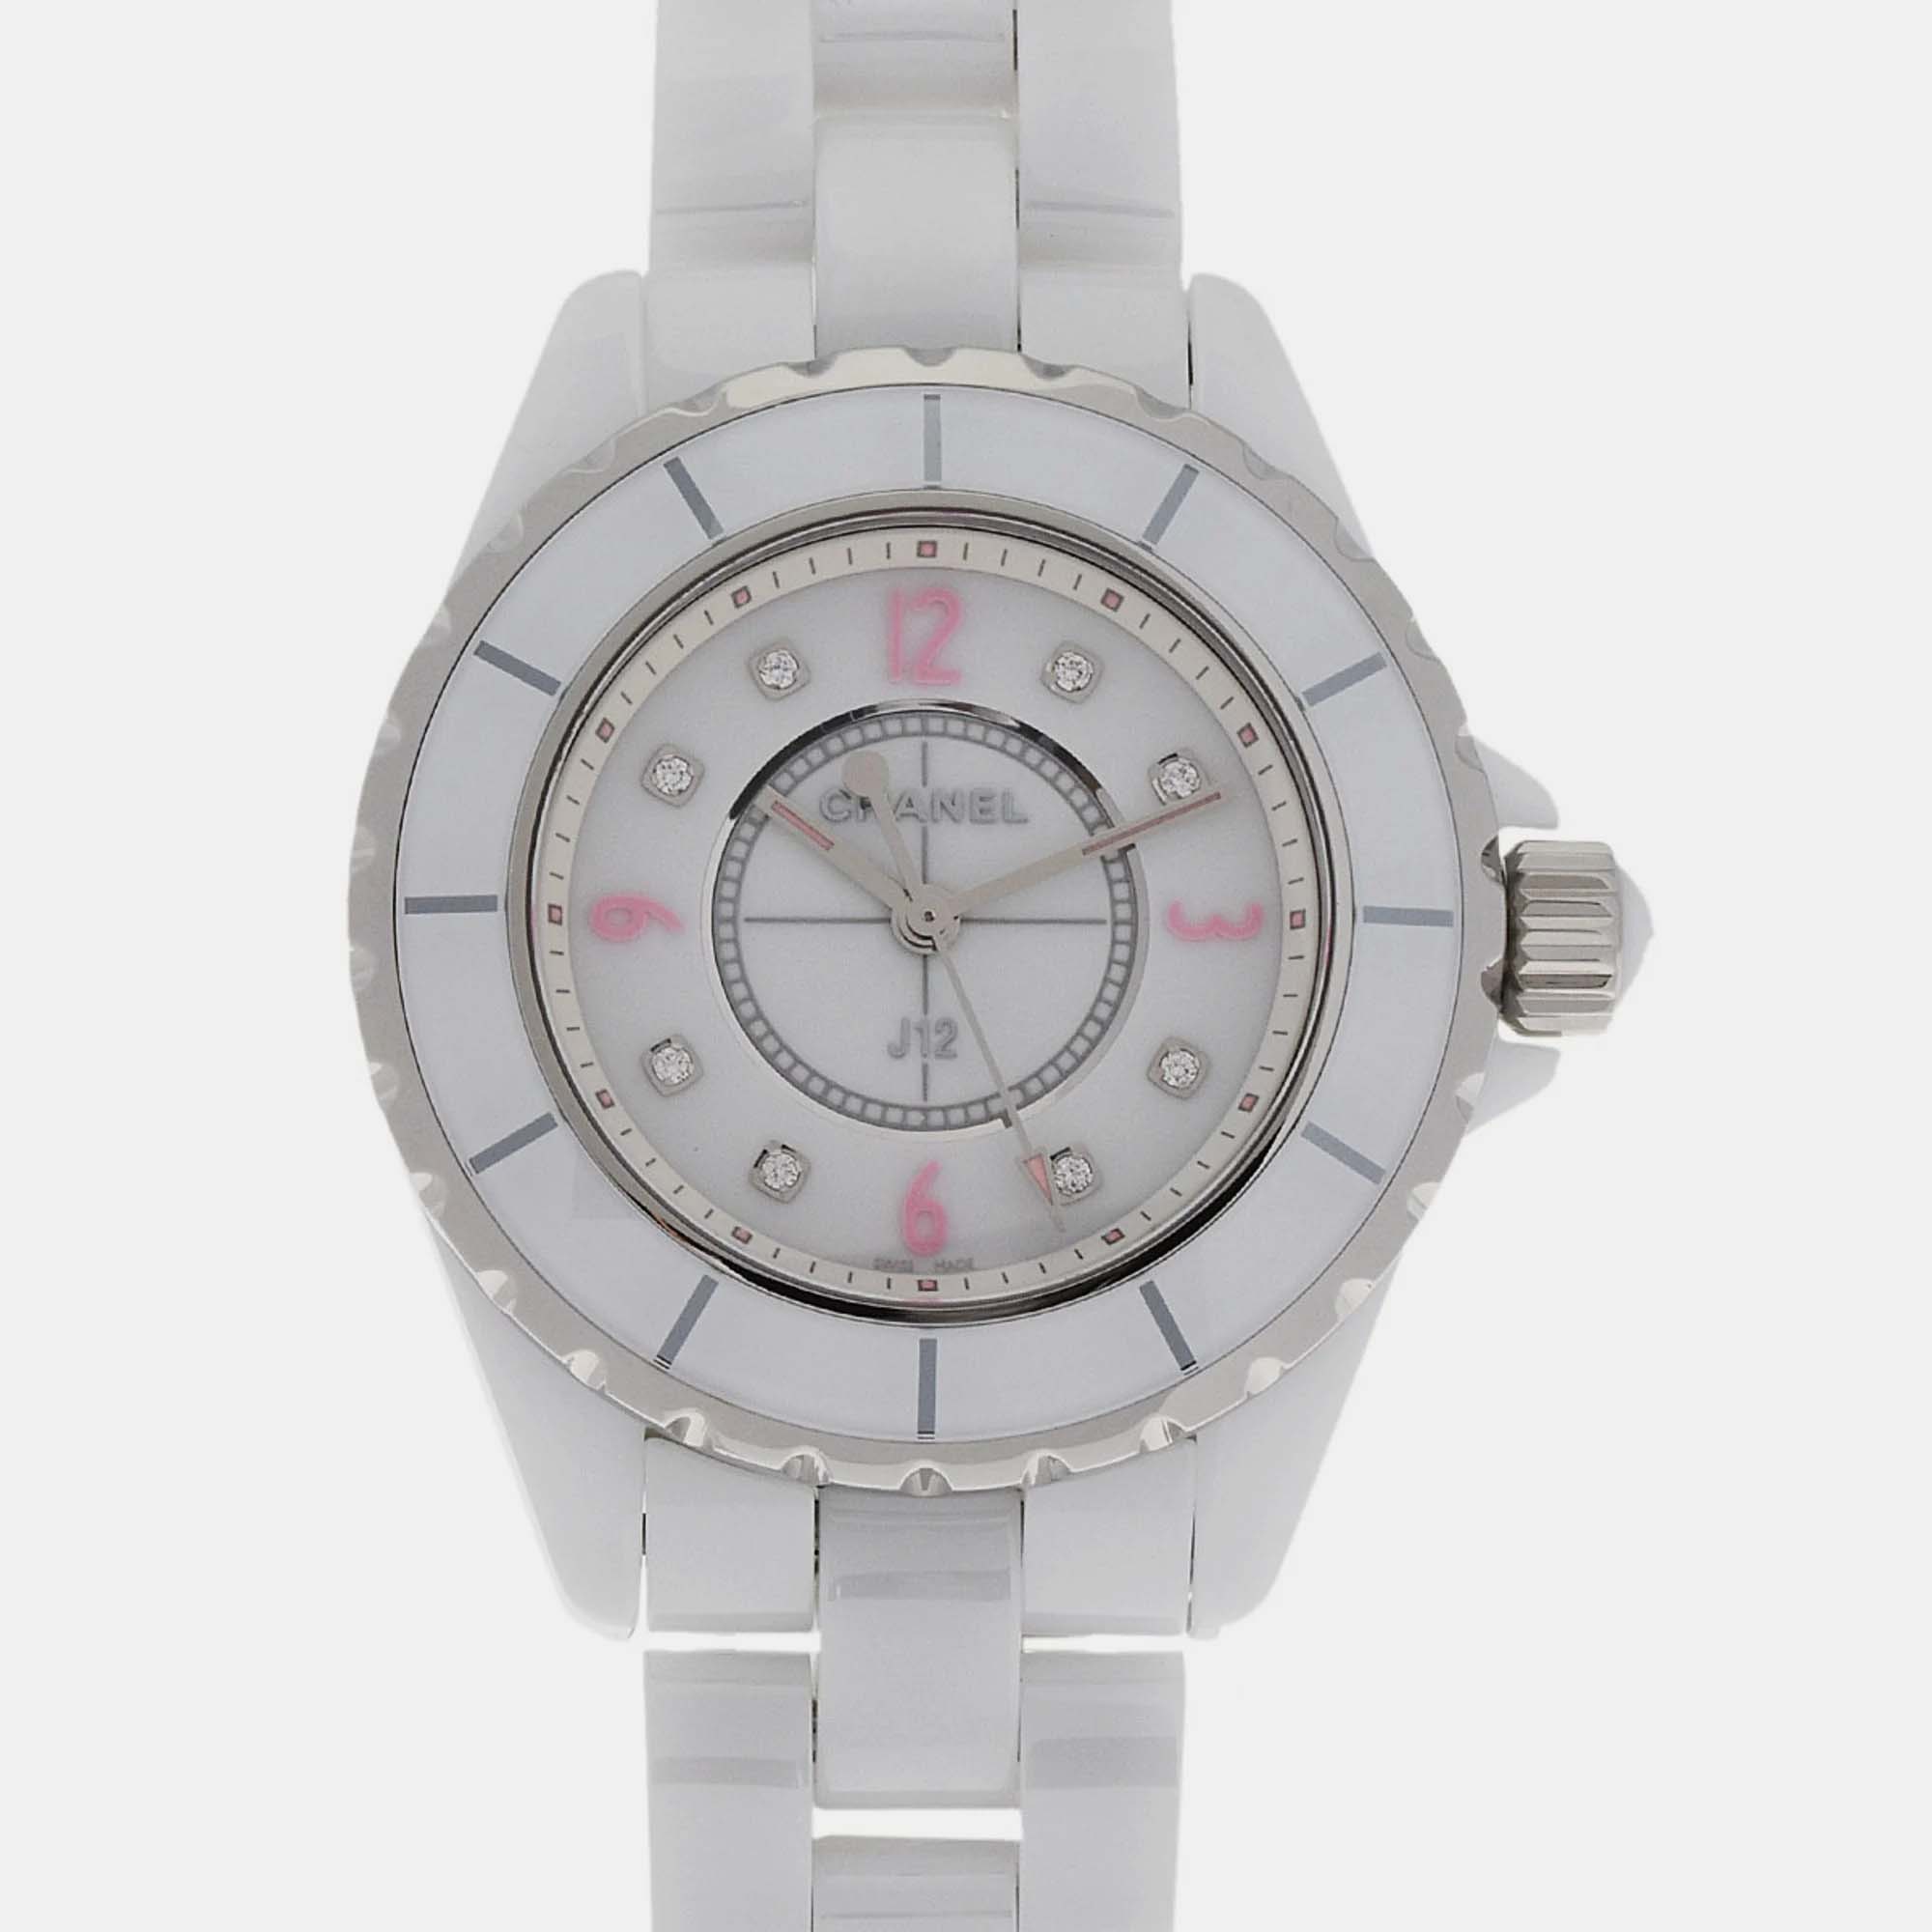 This authentic Chanel watch is characterized by skillful craftsmanship and understated charm. Meticulously constructed to tell time in an elegant way it comes in a sturdy case and flaunts a seamless blend of innovative design and flawless style.